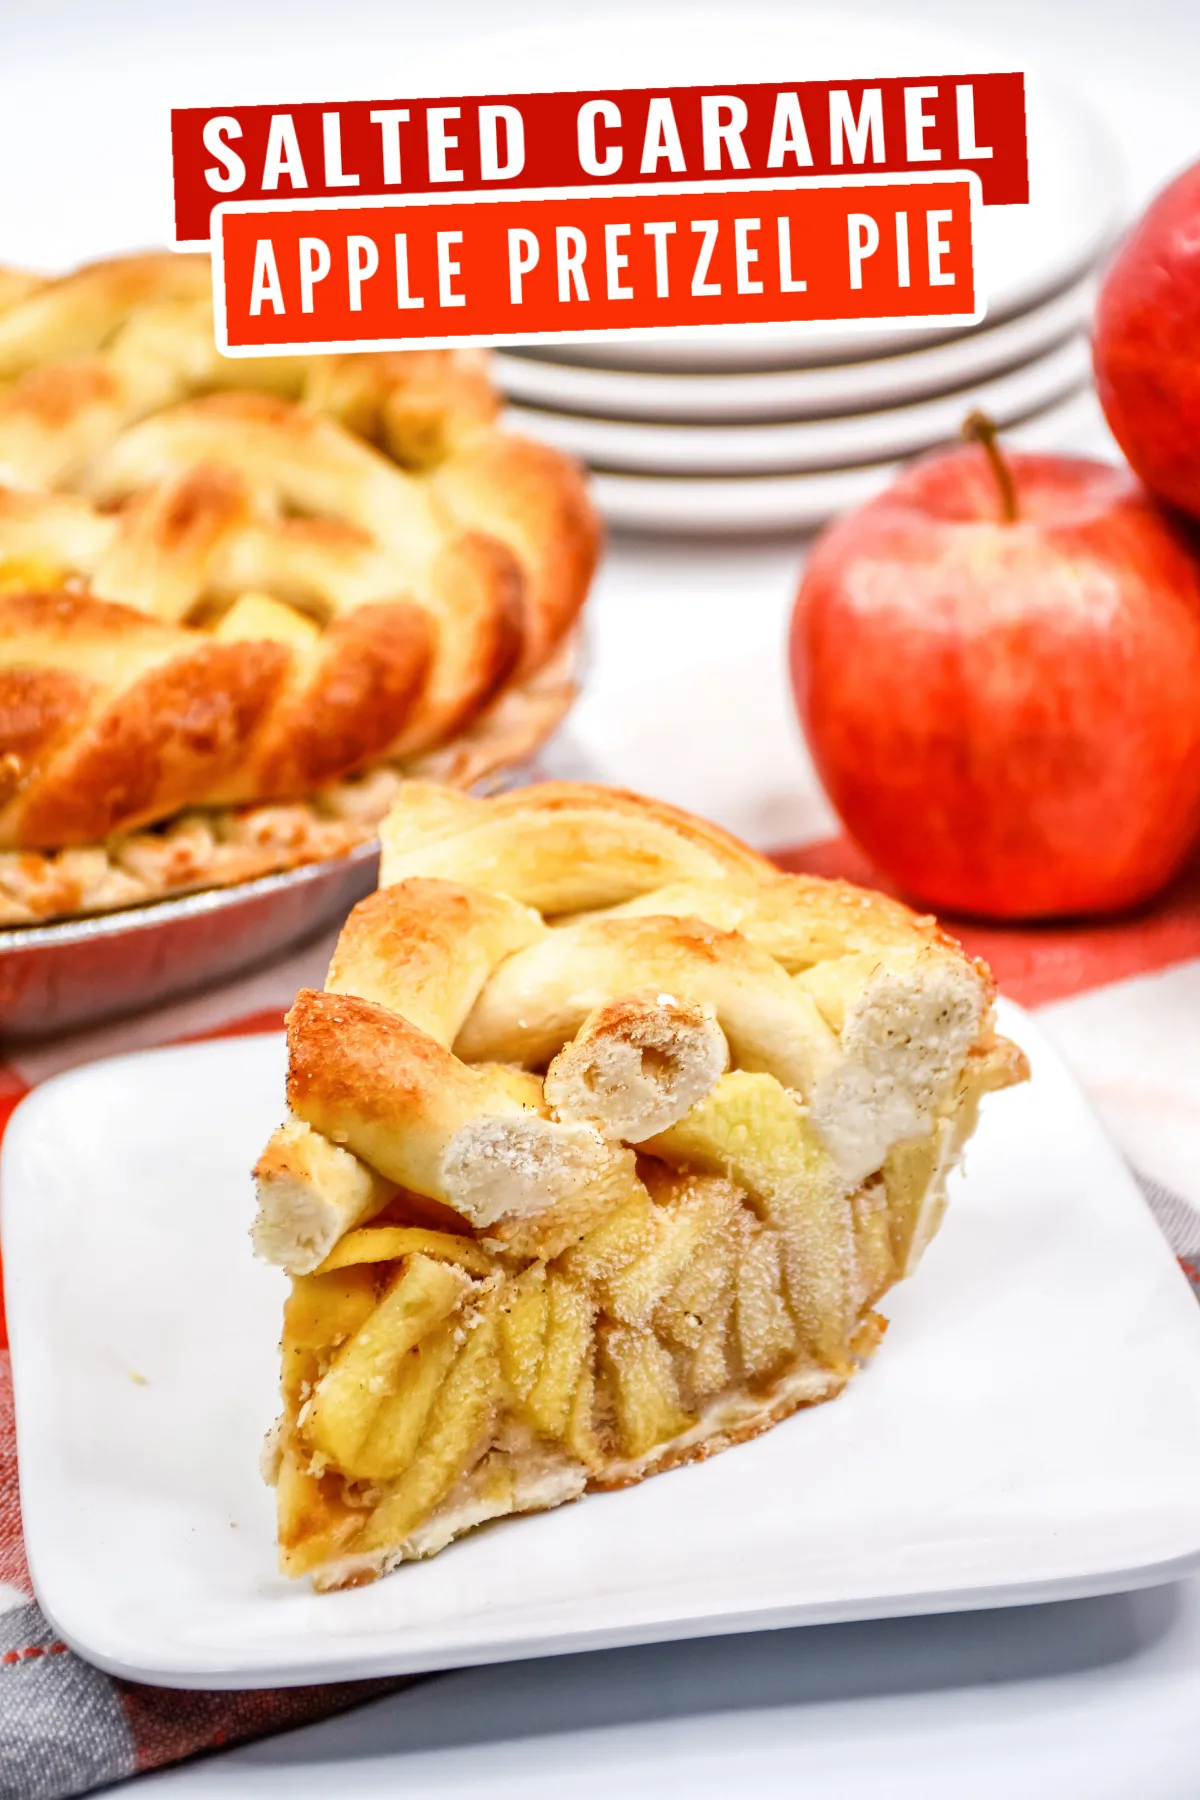 The perfect fall dessert with apples, caramel and pretzel – this Salted Caramel Apple Pretzel Pie Recipe is sweet, salty and creamy.